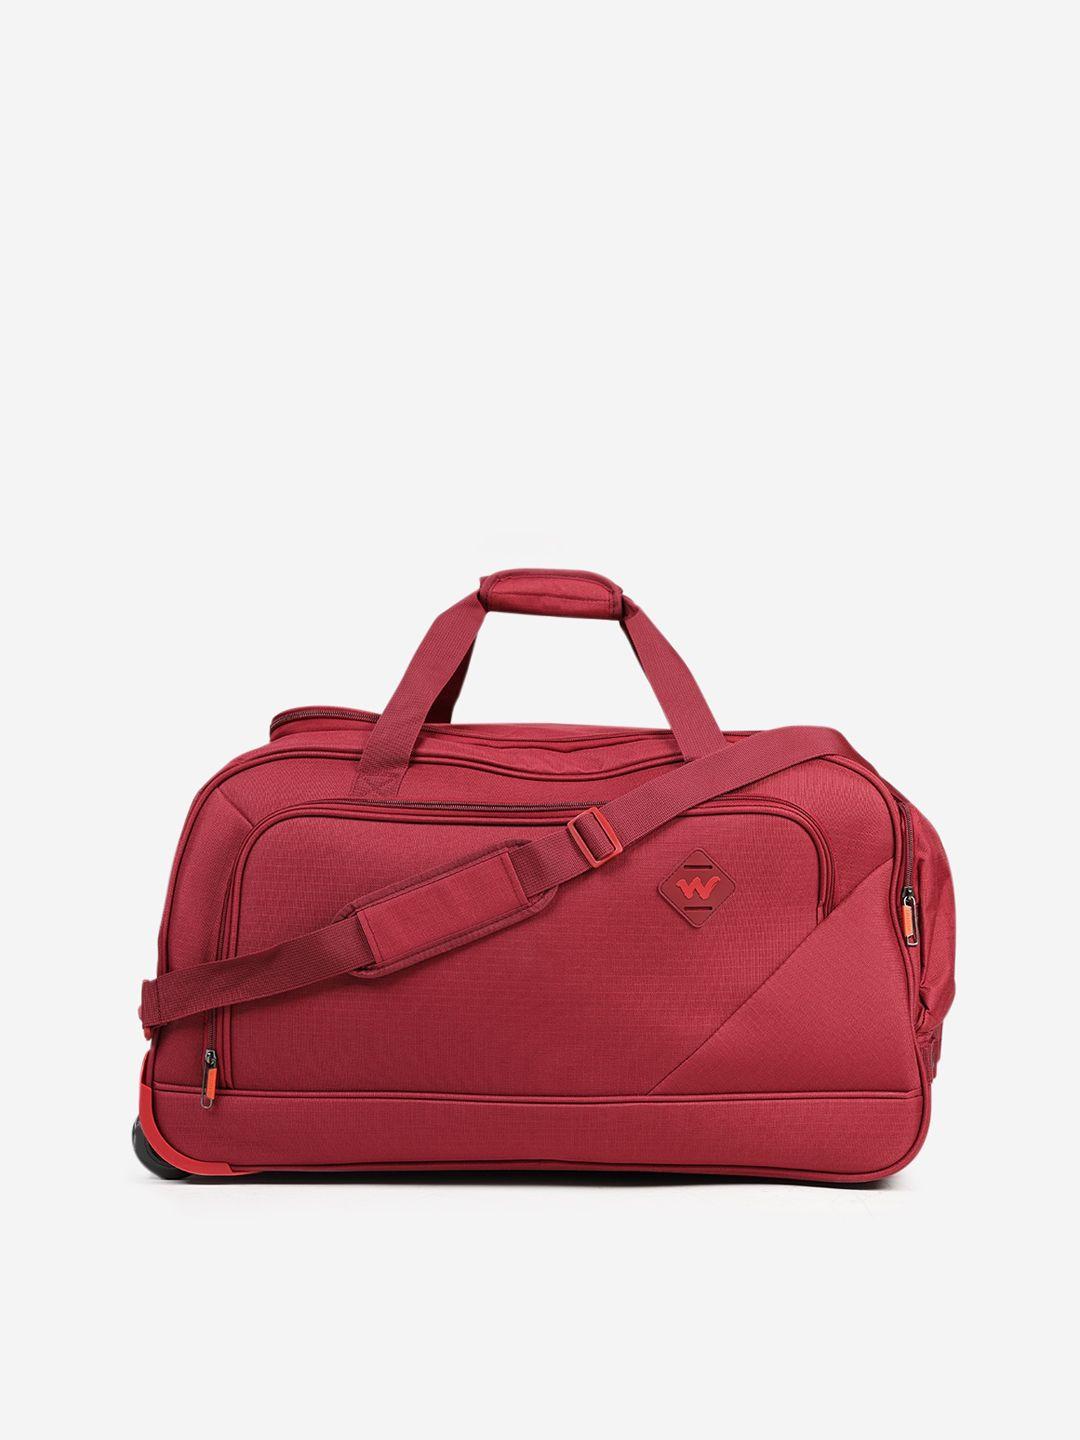 wildcraft red cabin large duffle bag